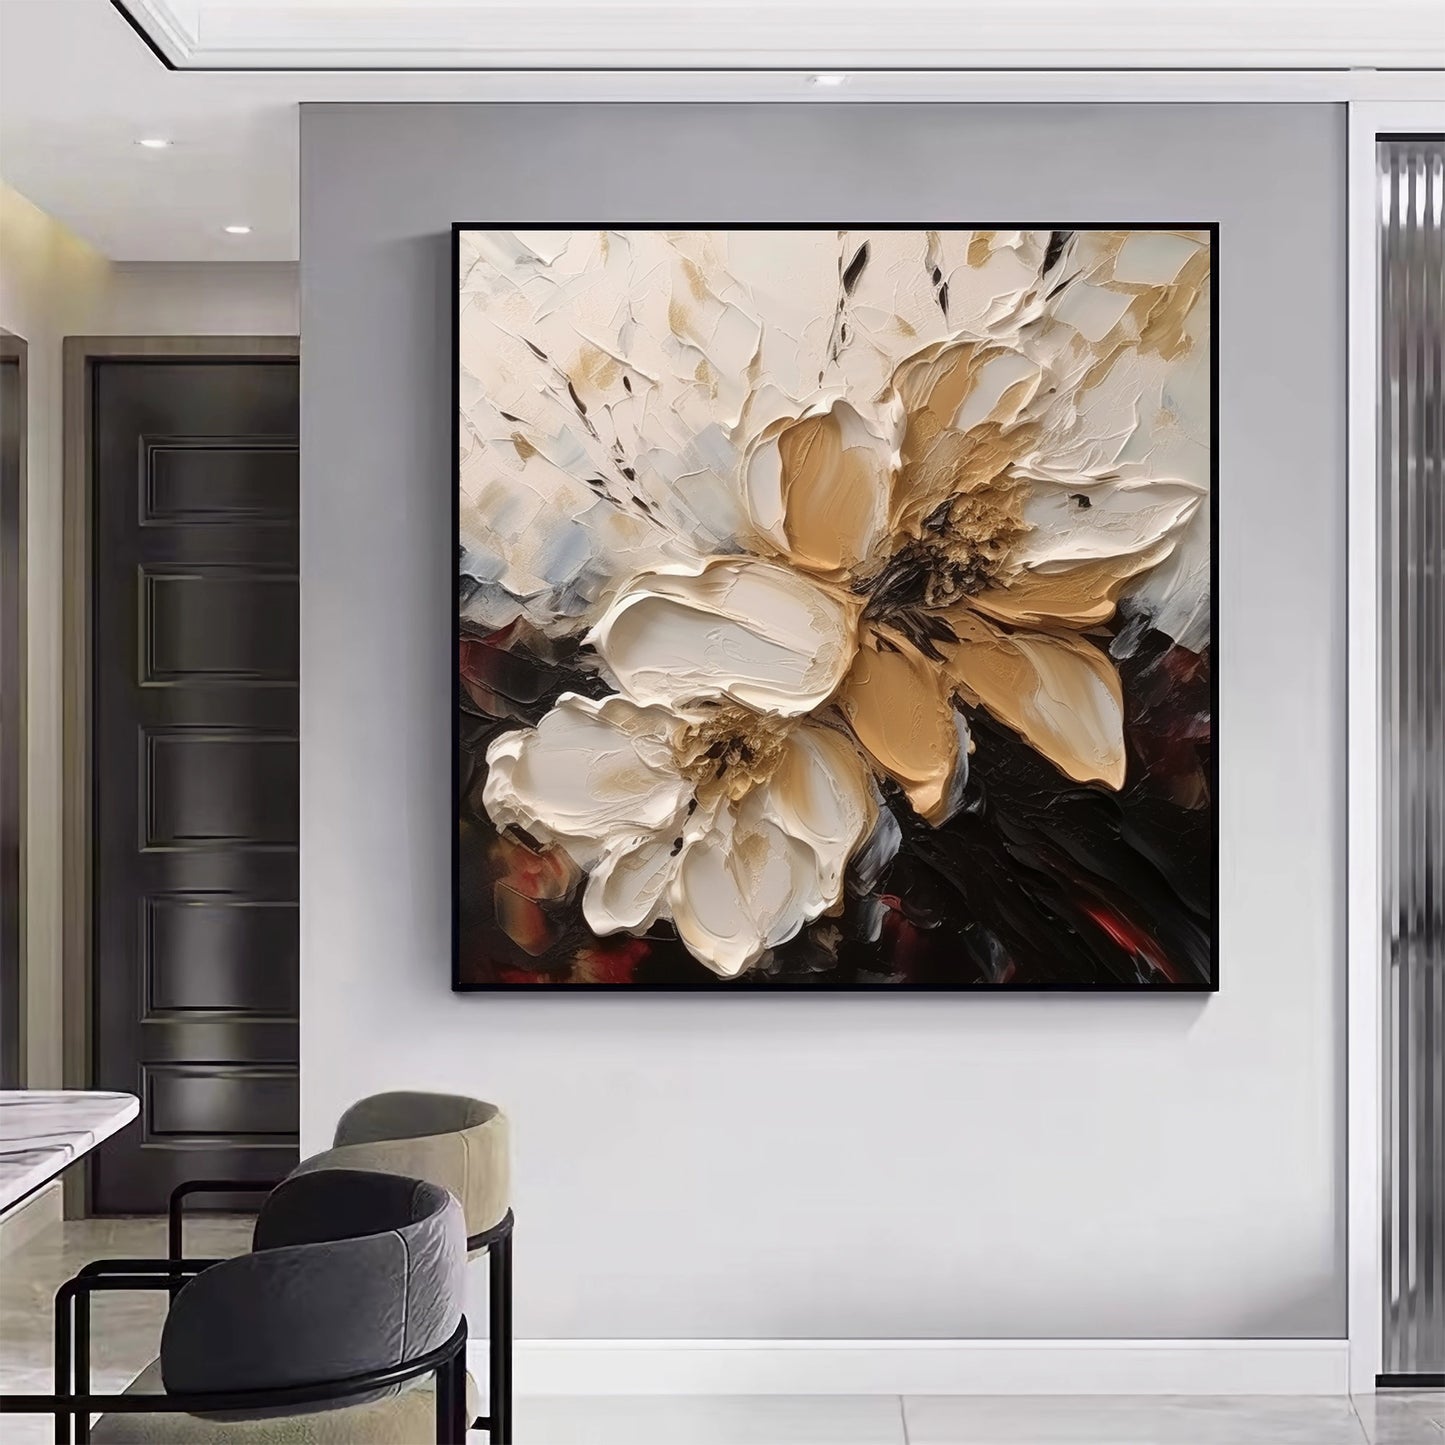 Texture Wall Decor Home Decor Gift Abstract Floral Painting F#BRT2385